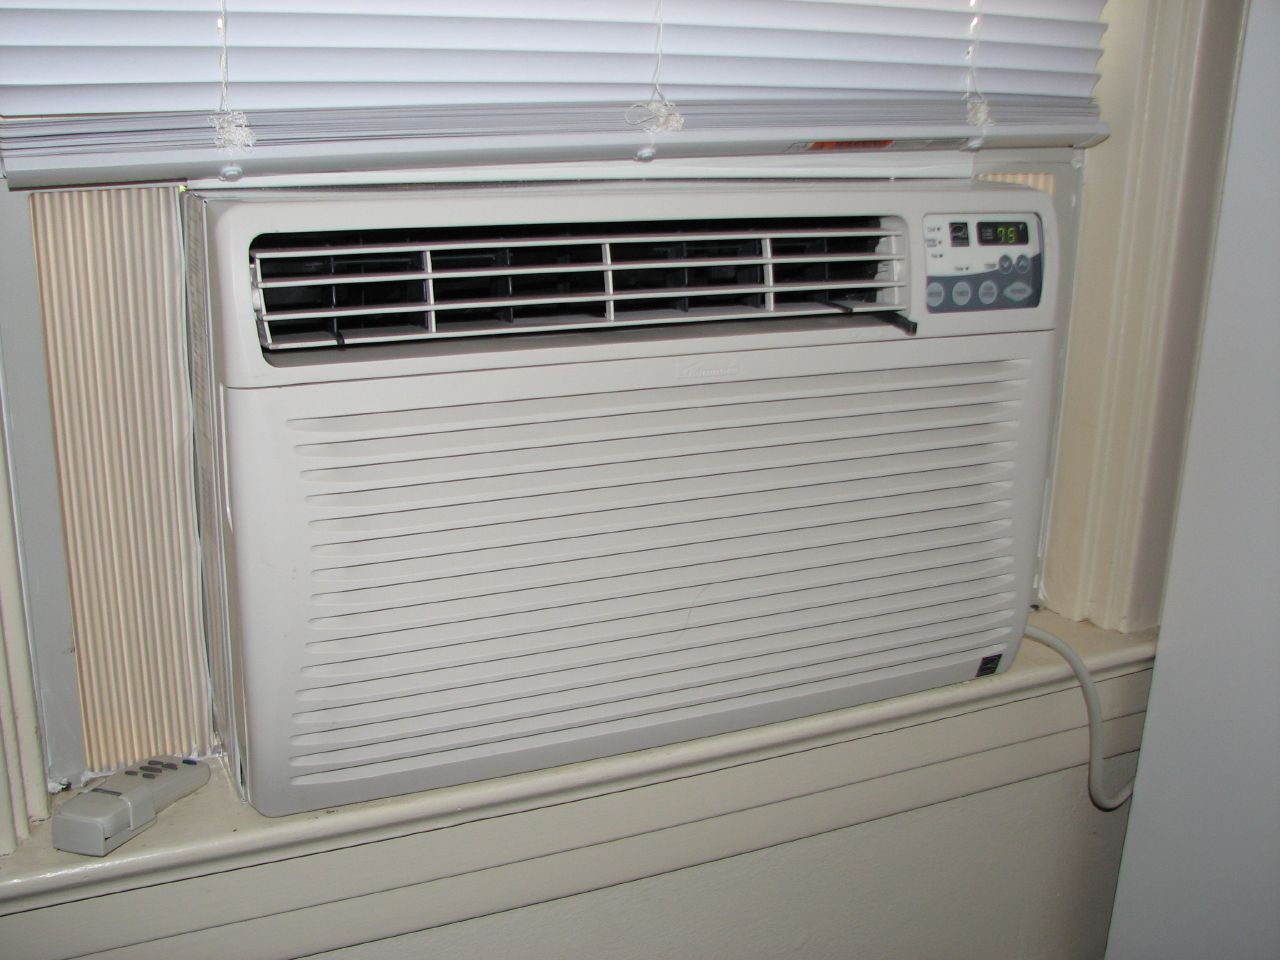 air conditioner sitting in a window sill with windowsill and blinds